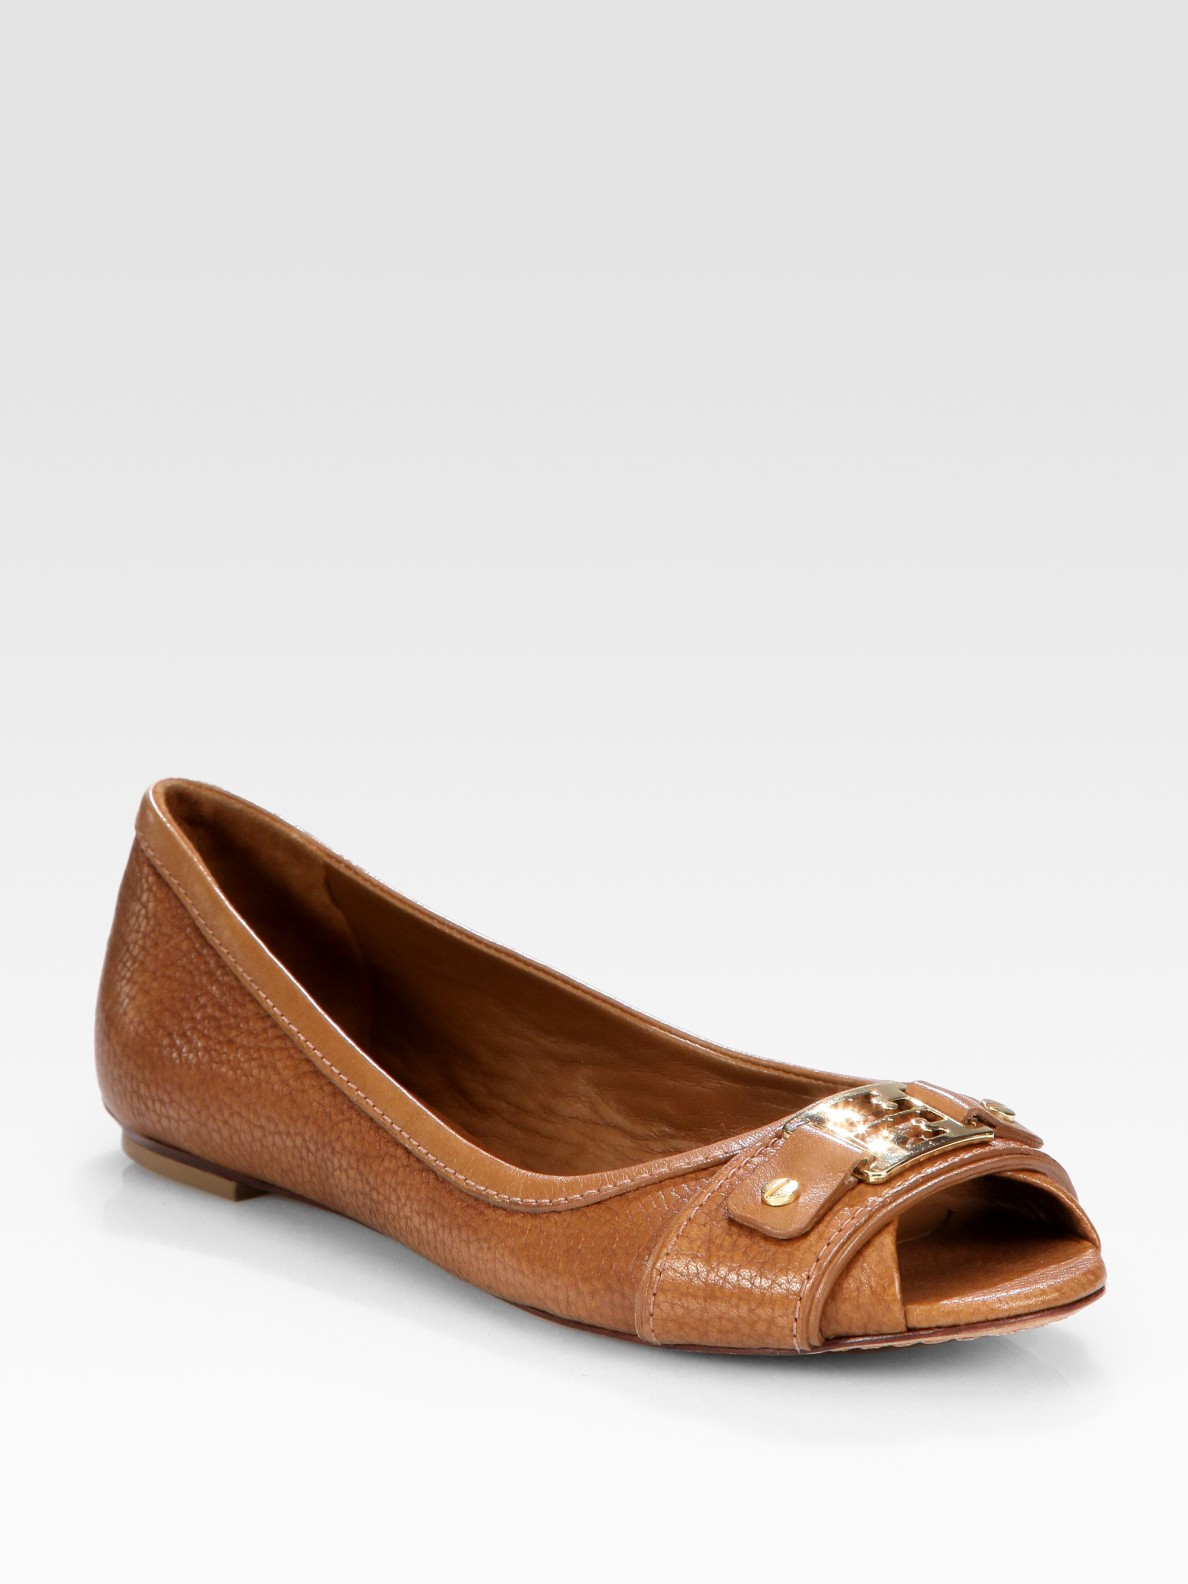 Tory Burch Cline Leather Peep Toe Logo Ballet Flats in Brown - Lyst